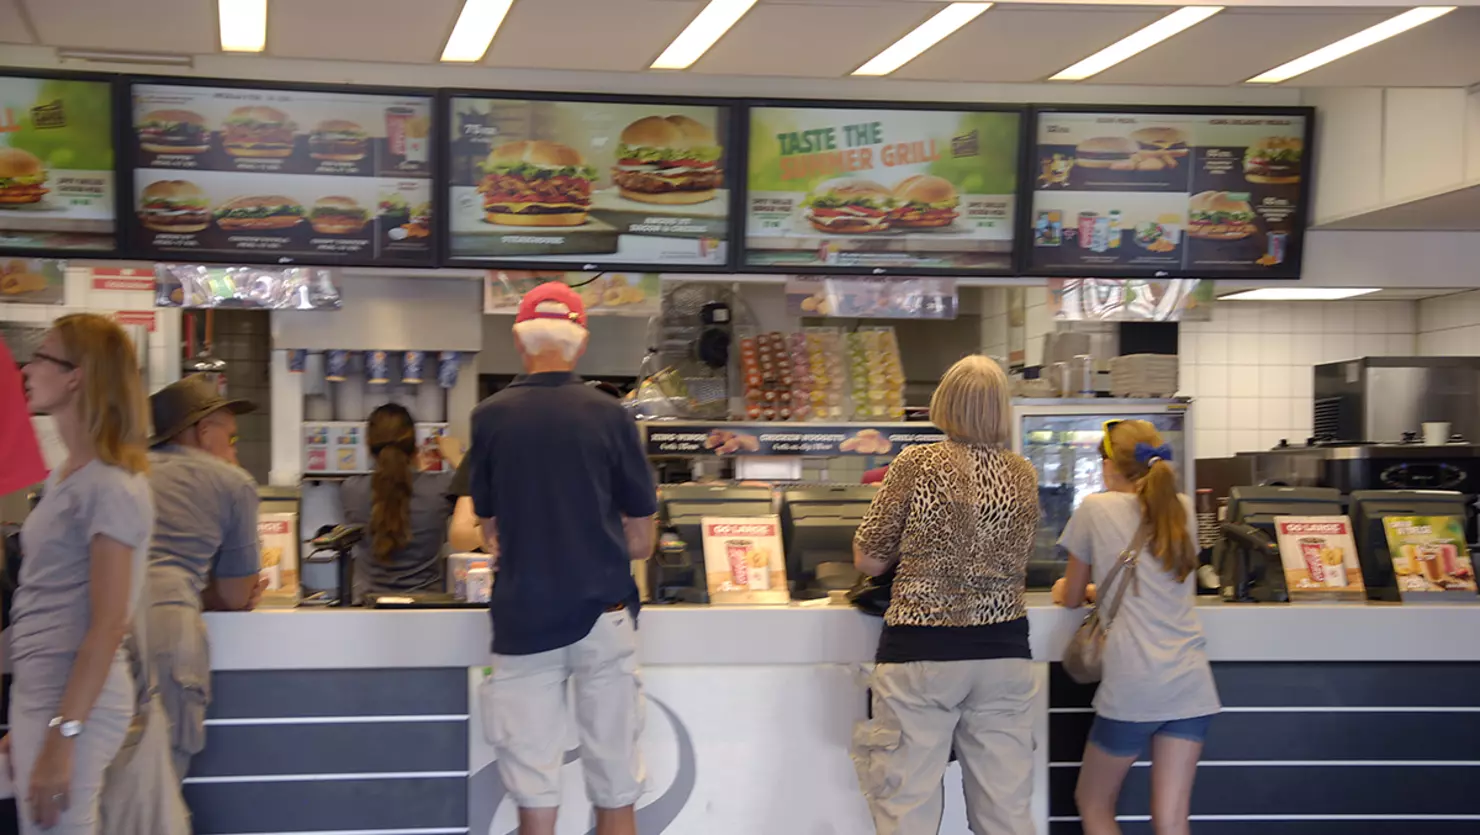 Major Shake-Up Why Your Favorite Fast-Food Spots Are Closing Down Across the U.S.